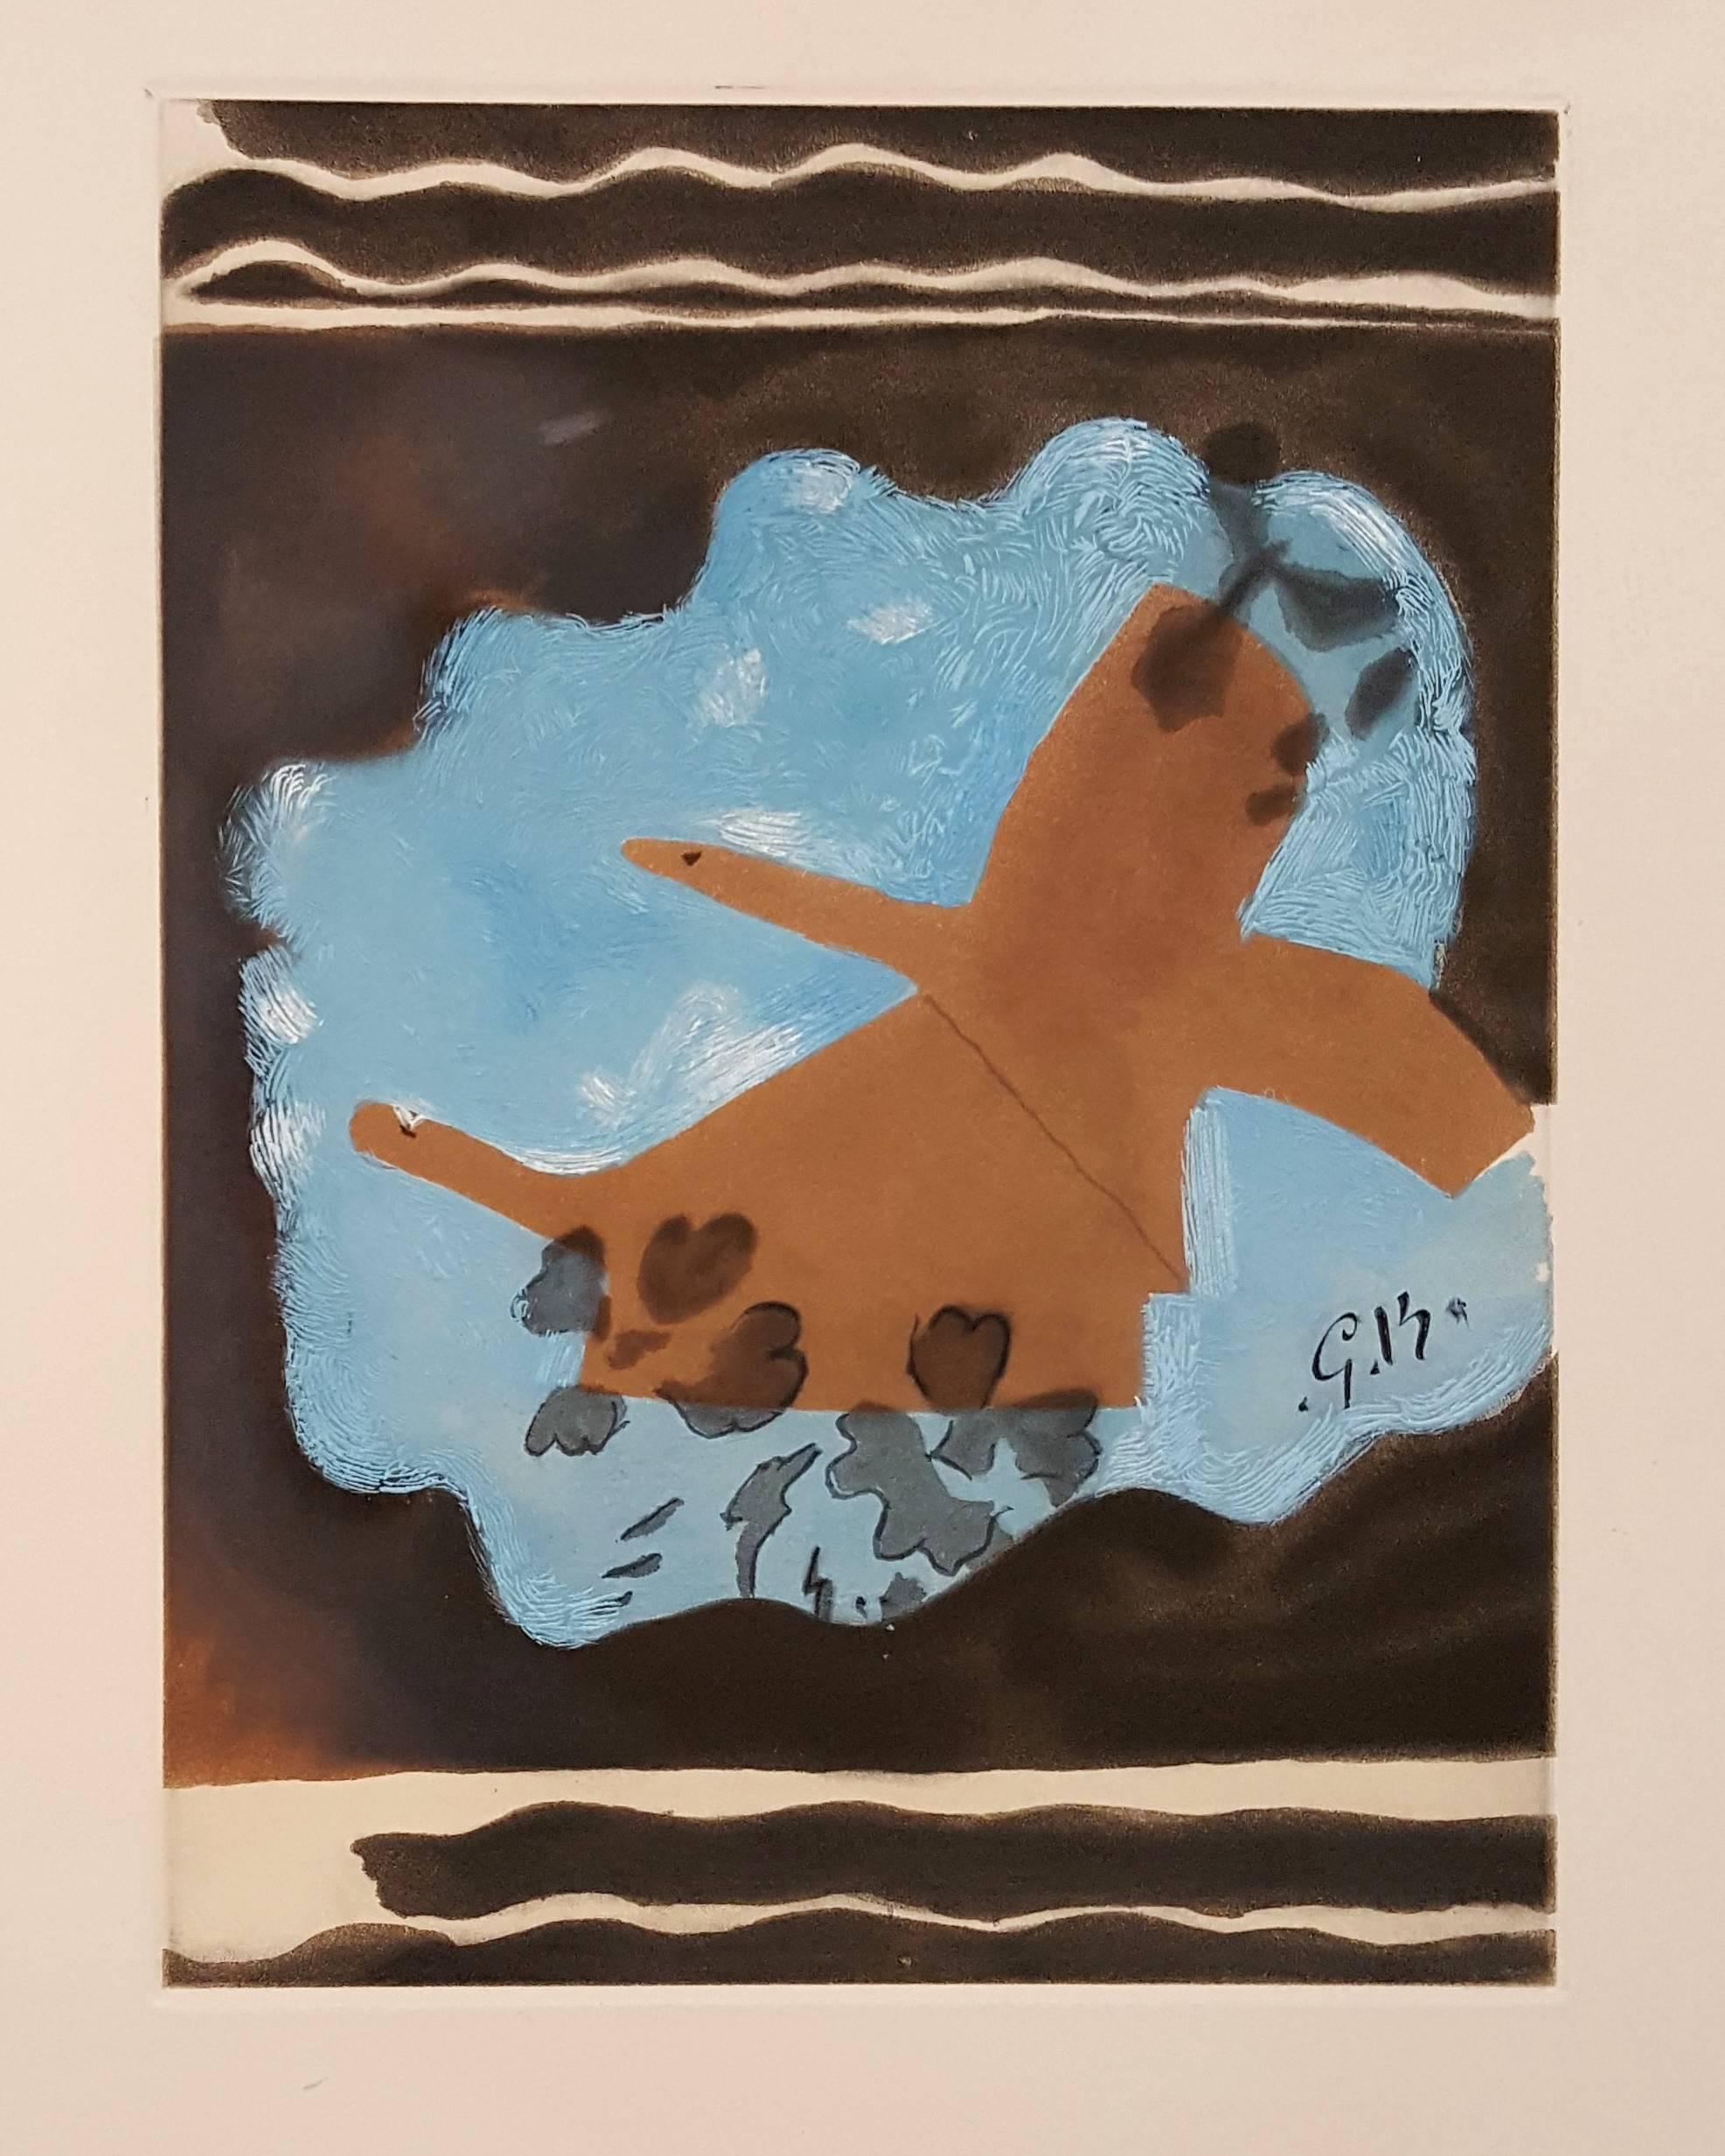 Georges BRAQUE
Migration 

Original etching, 1962
Handsigned in pencil
Annotated 